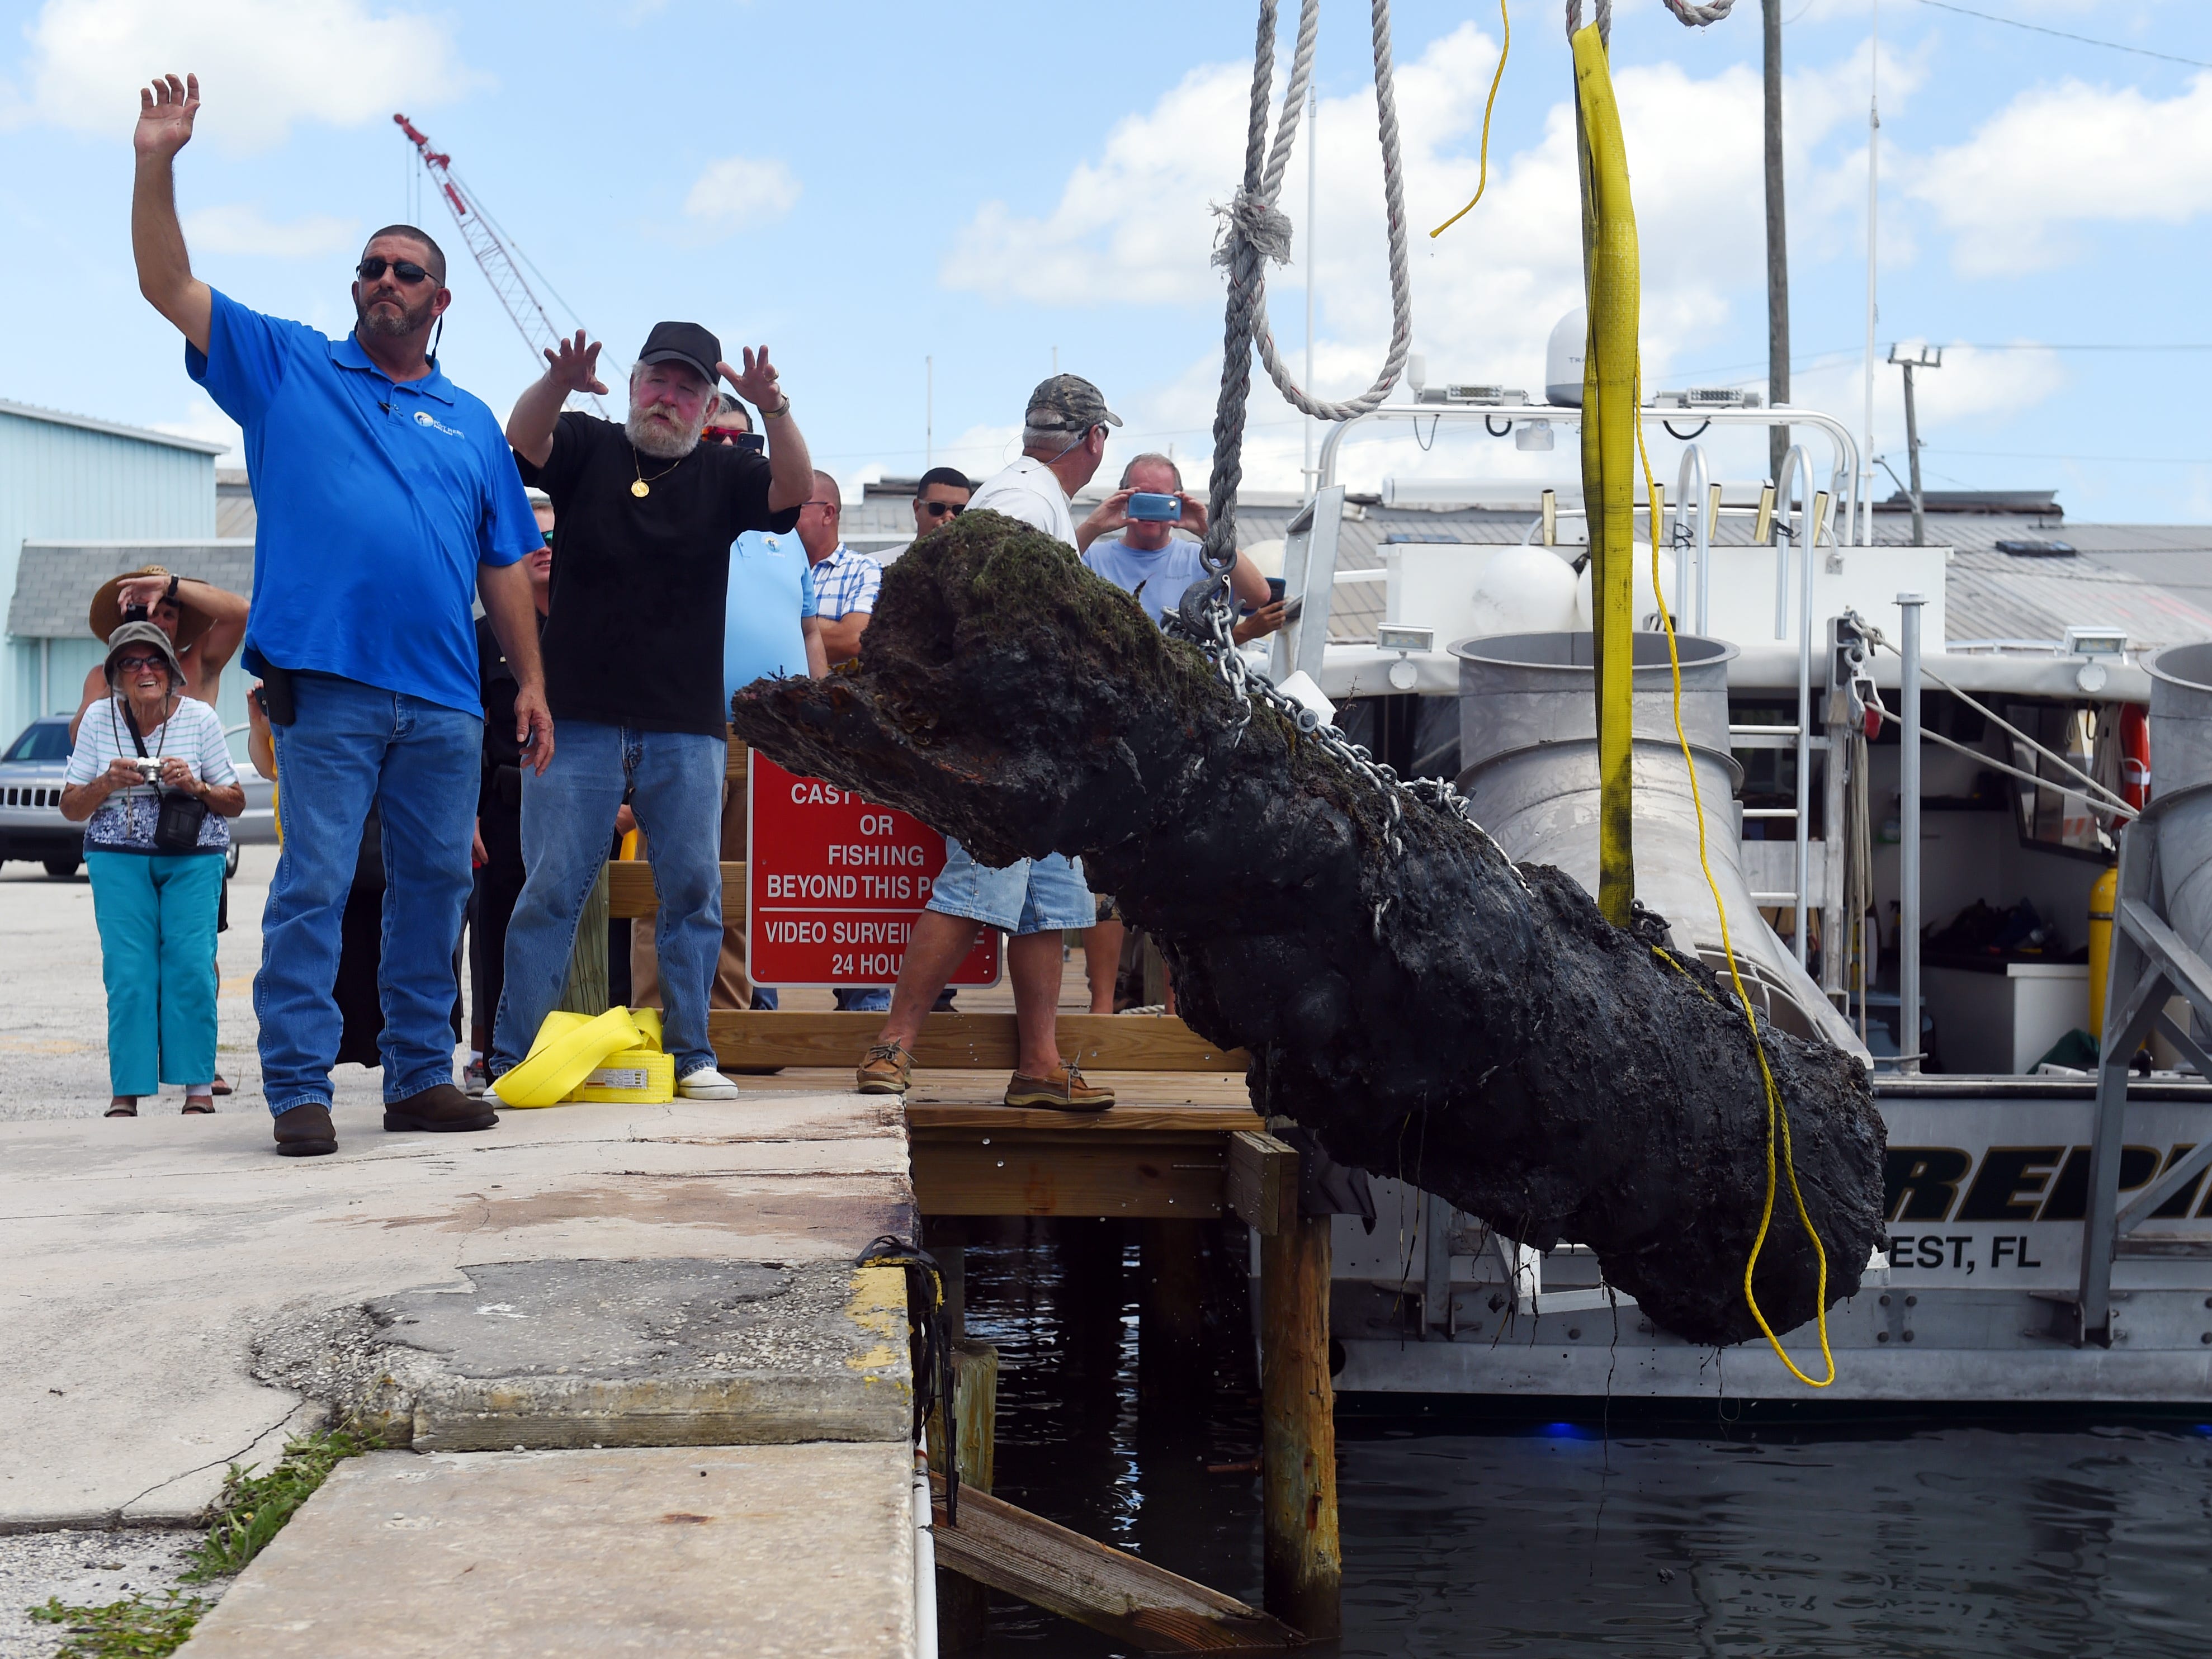 A 303-year-old cannon from the 1715 Spanish Plate Fleet was recovered off Sandy Point on Monday, Aug. 13, 2018 and removed from the water at Fisherman's Wharf in Fort Pierce. The cannon will be cleaned, treated and restored, a process that takes about three years, and placed on display at Melody Lane Fishing Pier in Fort Pierce.